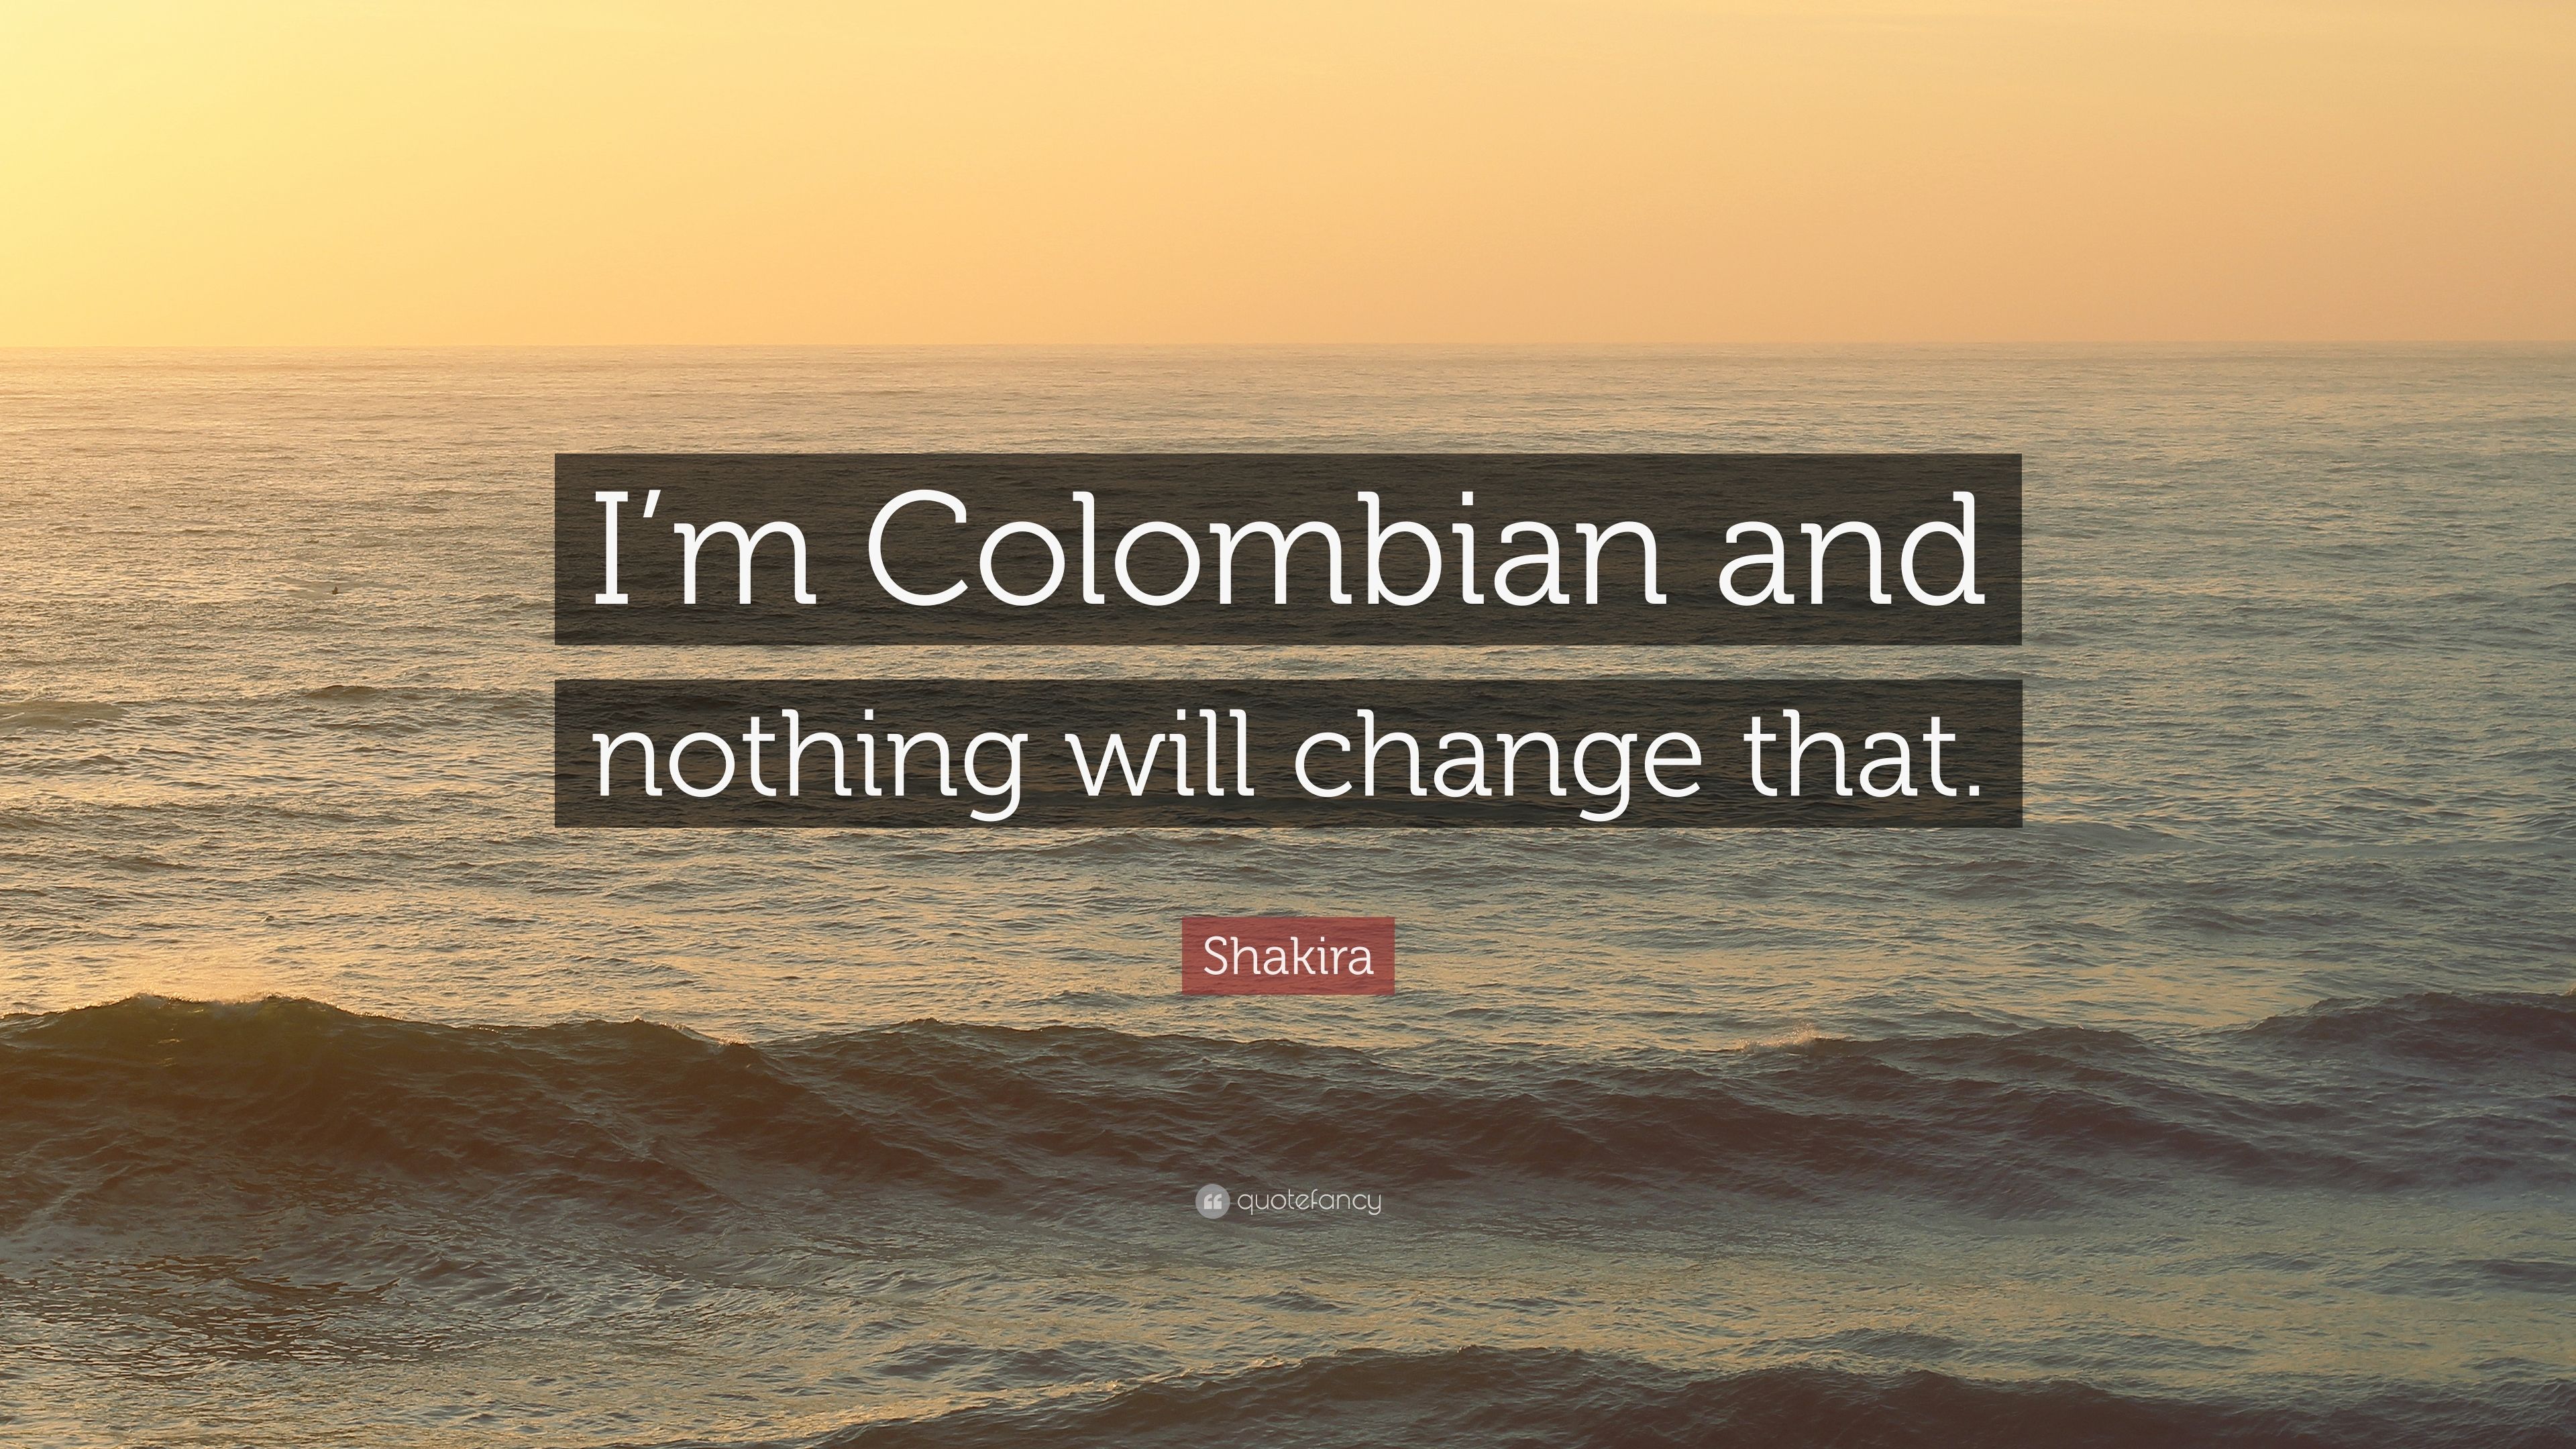 Shakira Quote: “I'm Colombian and nothing will change that